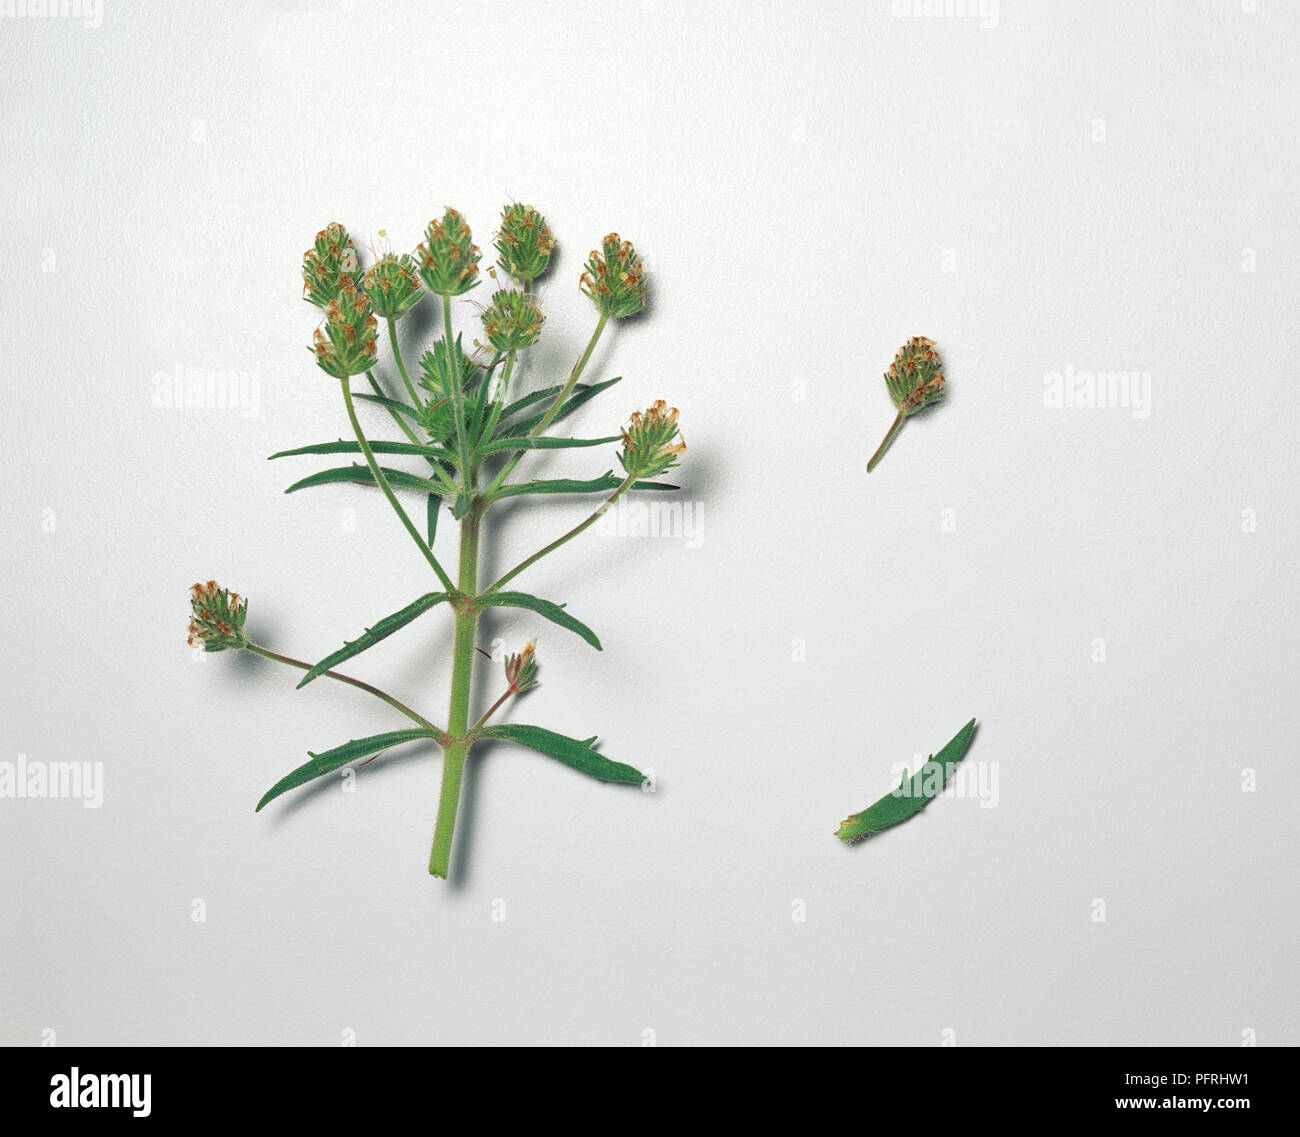 Plantago afra, stem with flowers and leaves Stock Photo